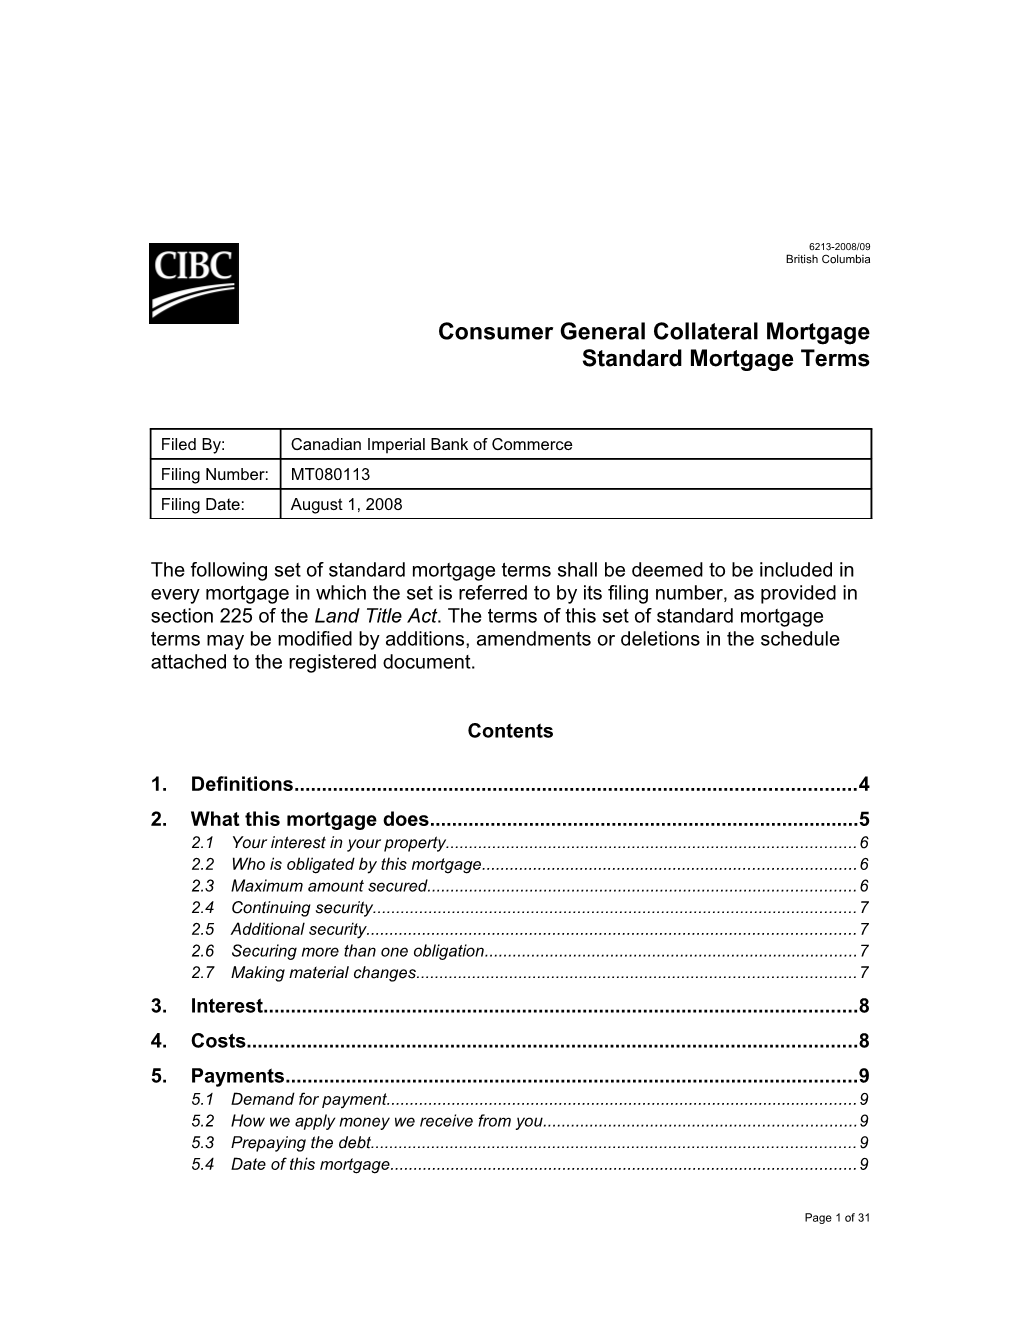 Consumer General Collateral Mortgage - Standard Mortgage Terms (6213 British Columbia-2008/09)